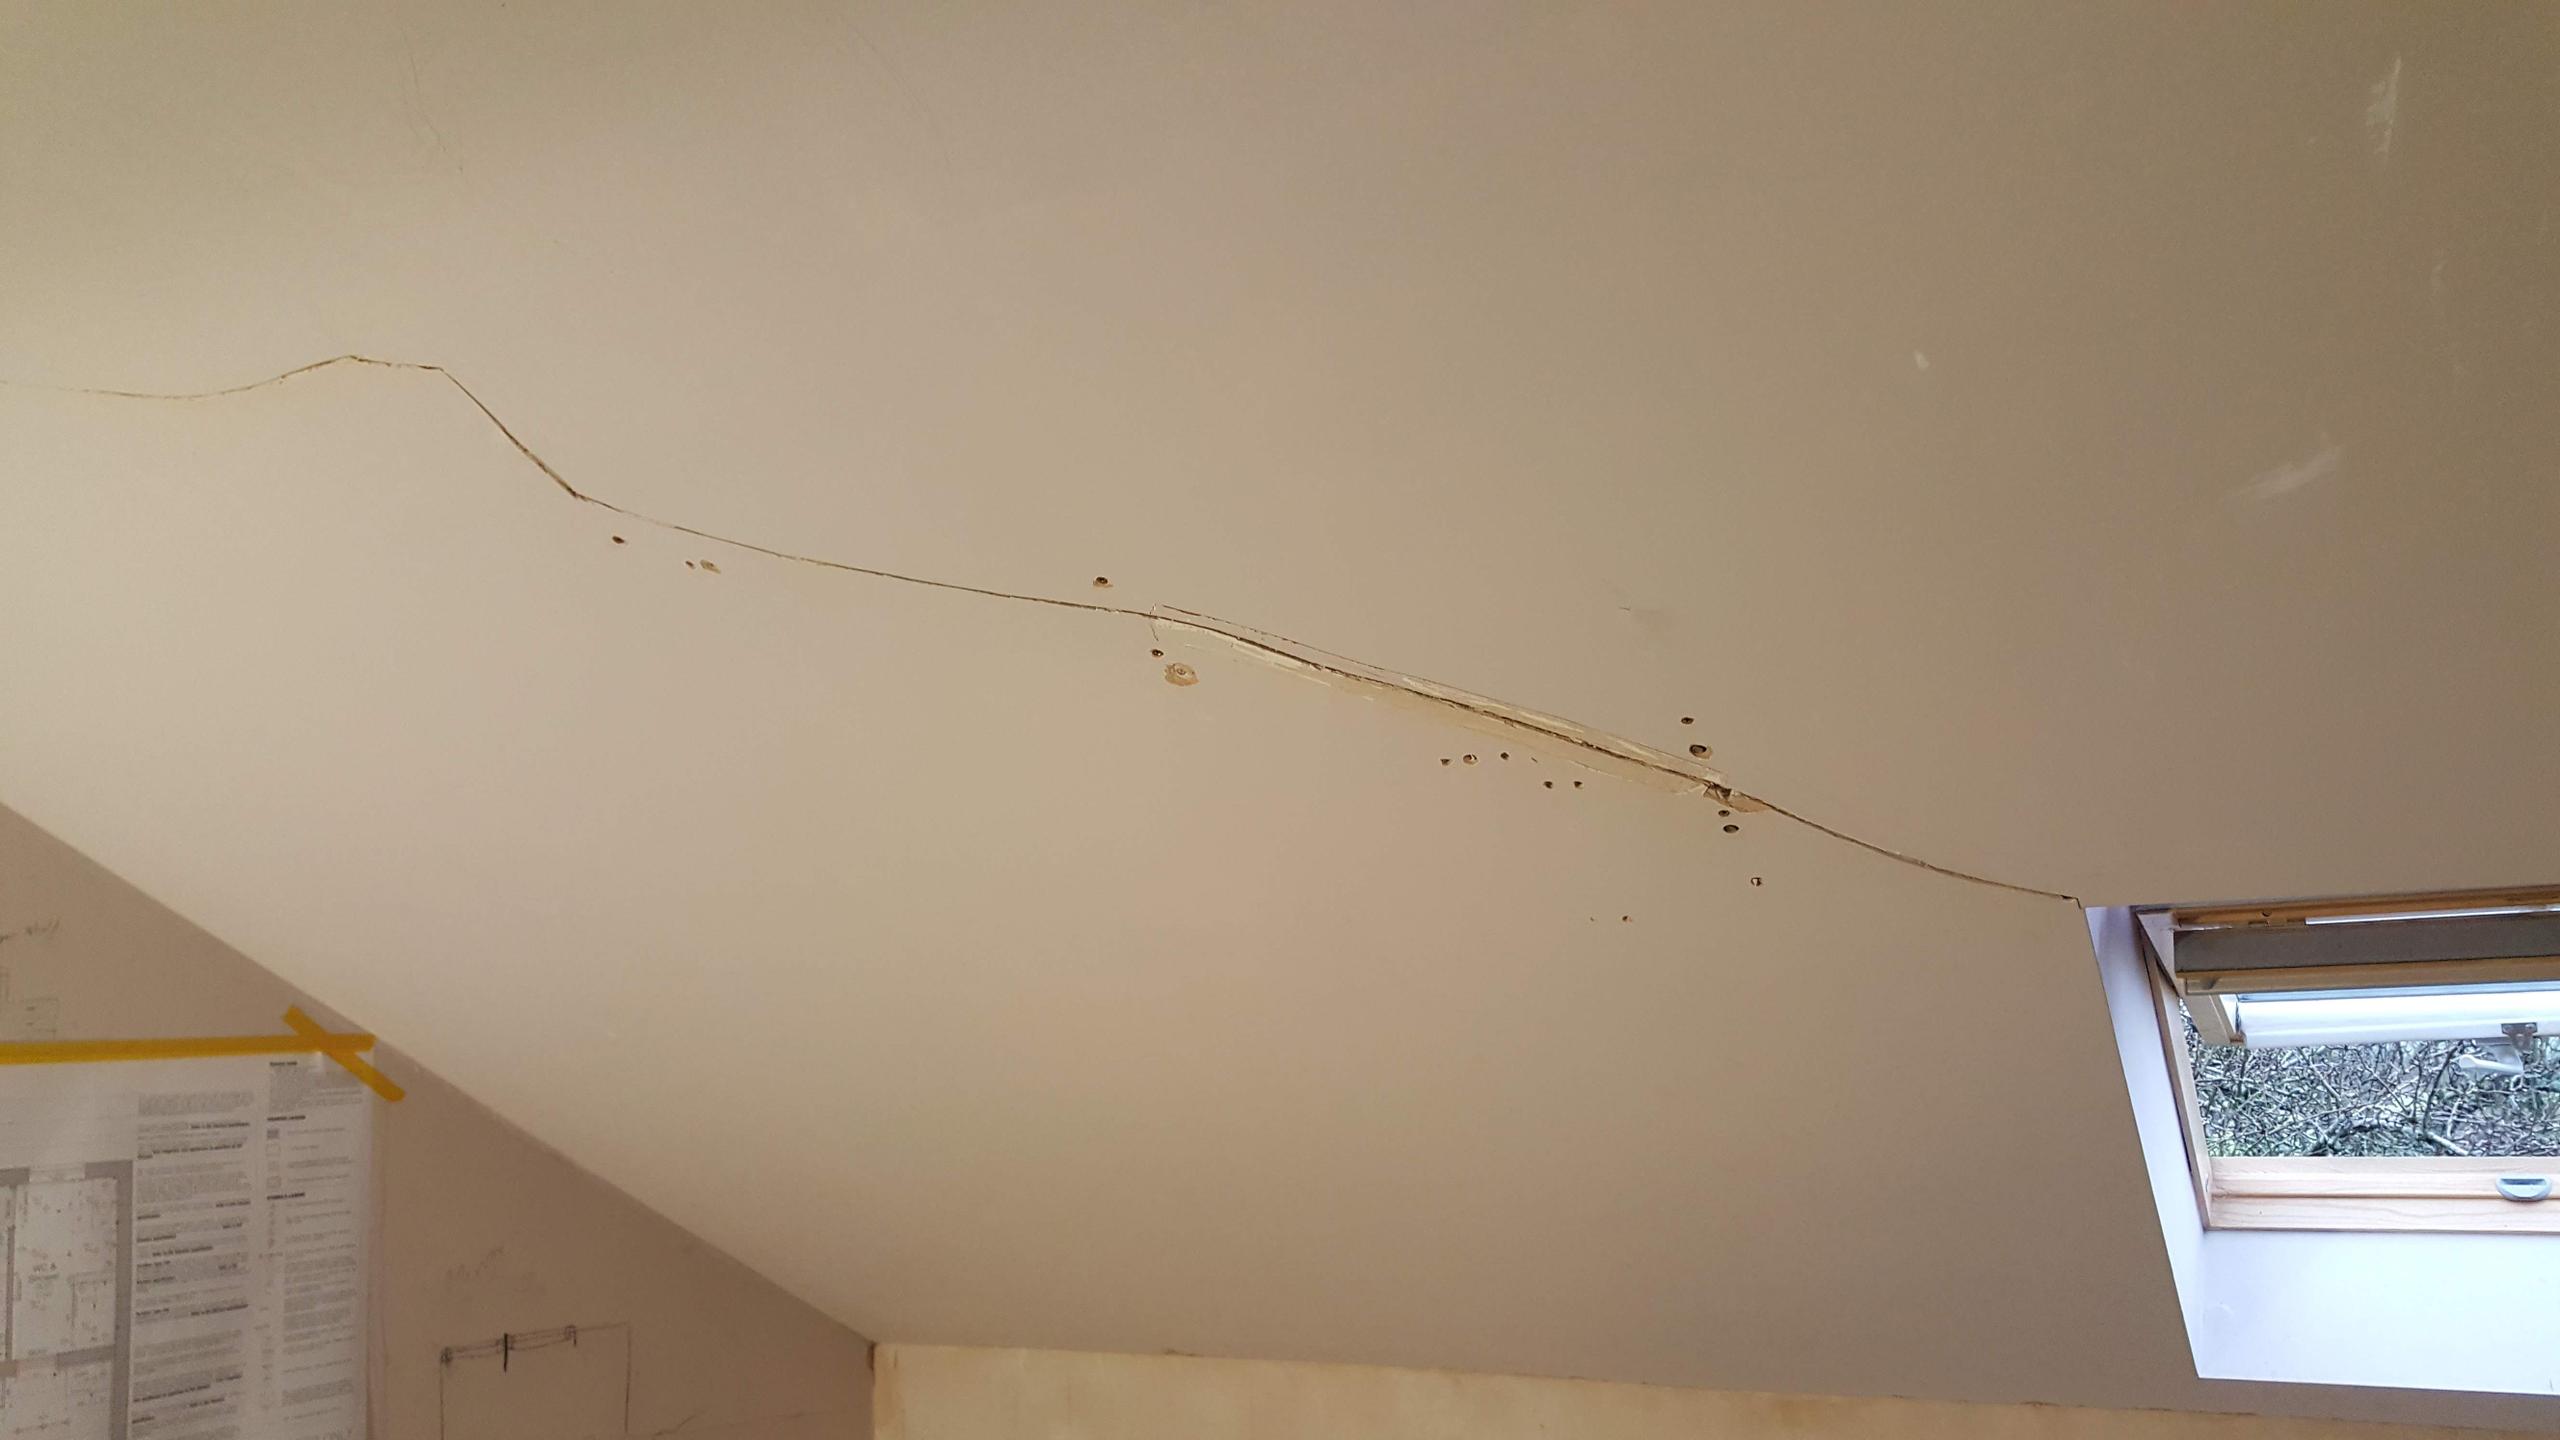 A roofer had managed to damage the ceiling